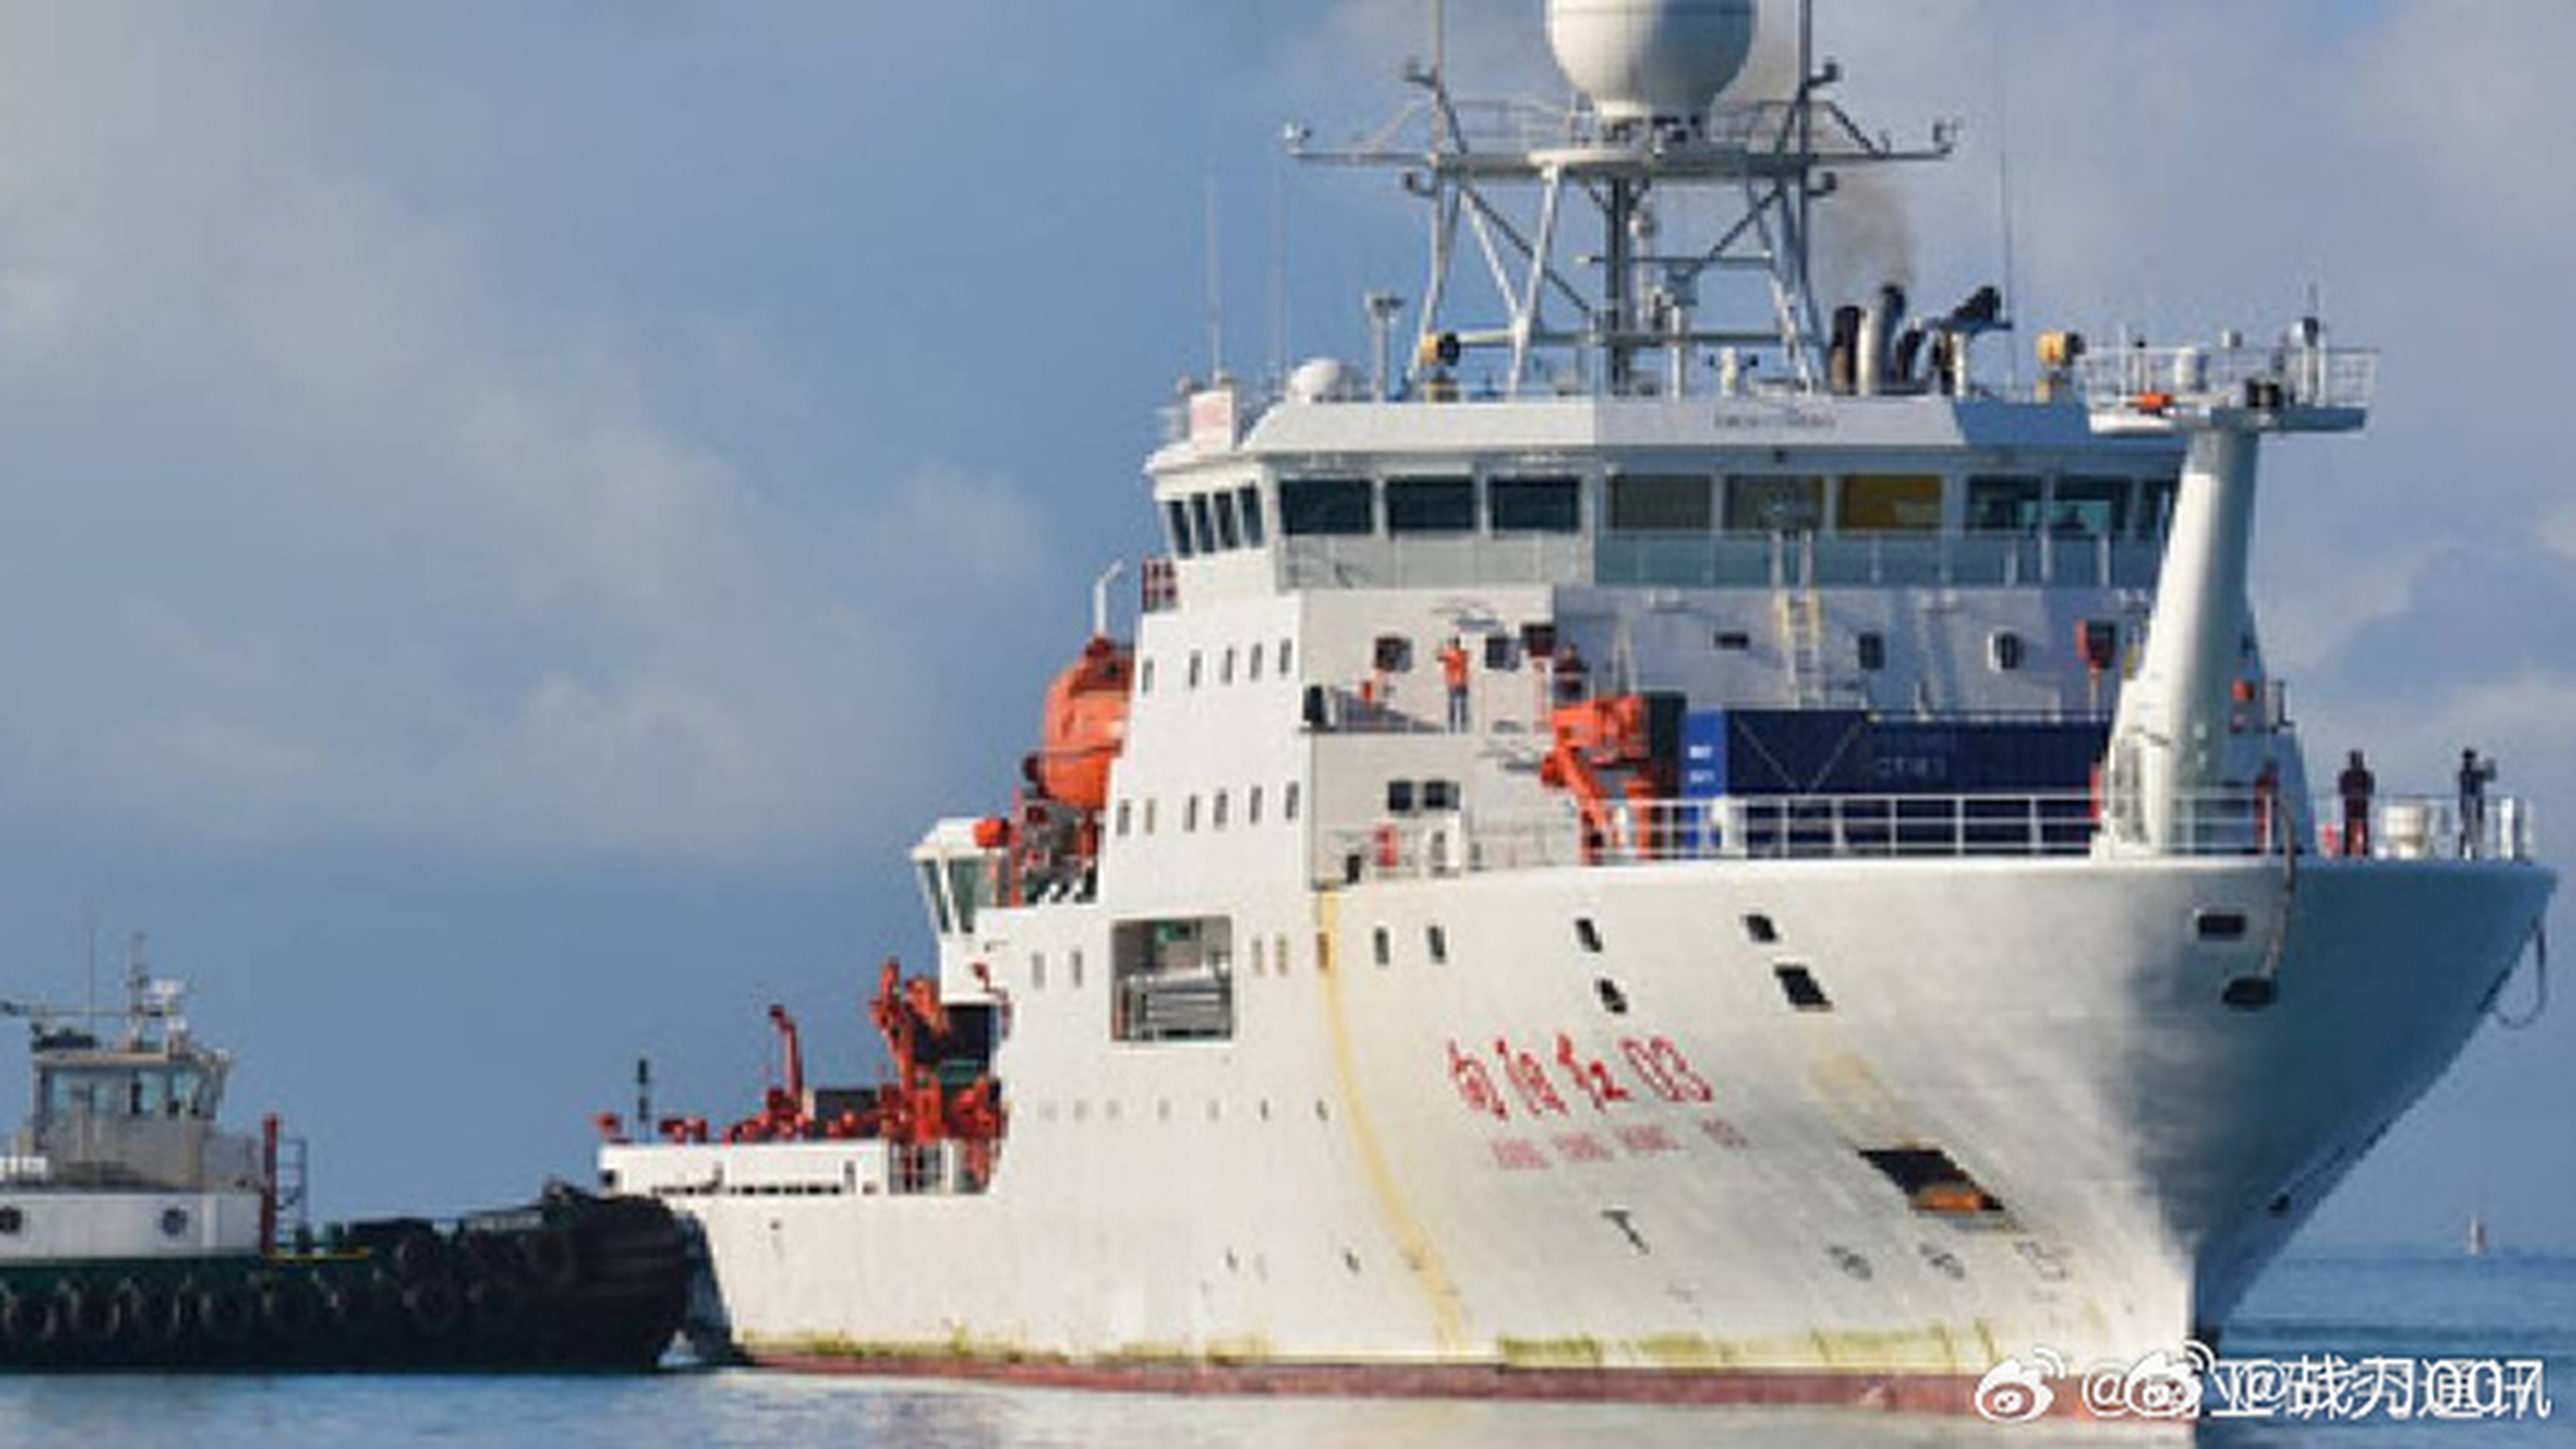 Chinese research ship Xiang Yang Hong 03 has visited the Indian Ocean multiple times. Photo: Weibo